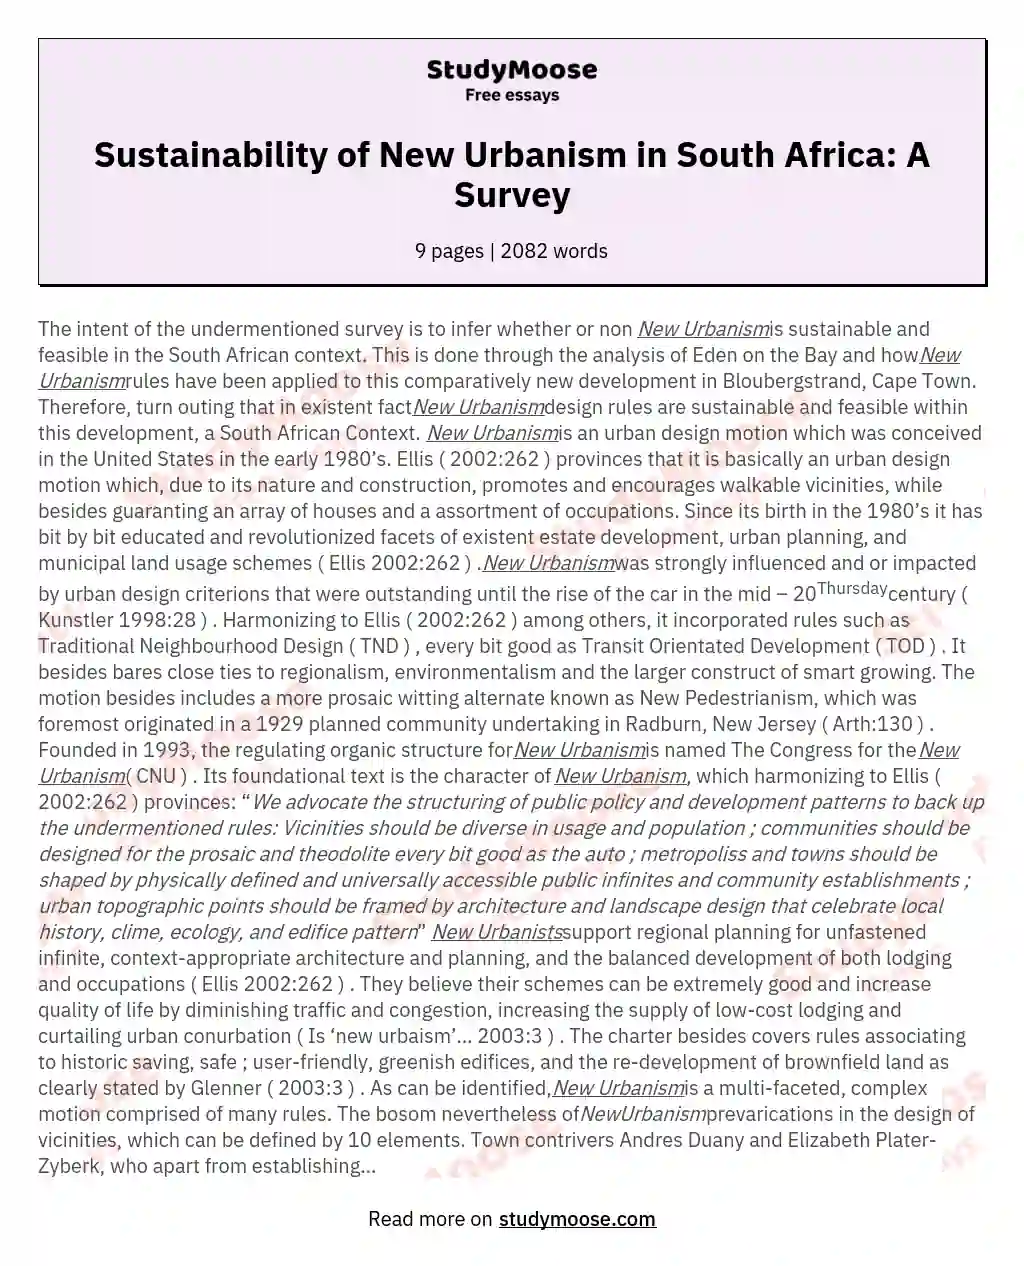 Sustainability of New Urbanism in South Africa: A Survey essay